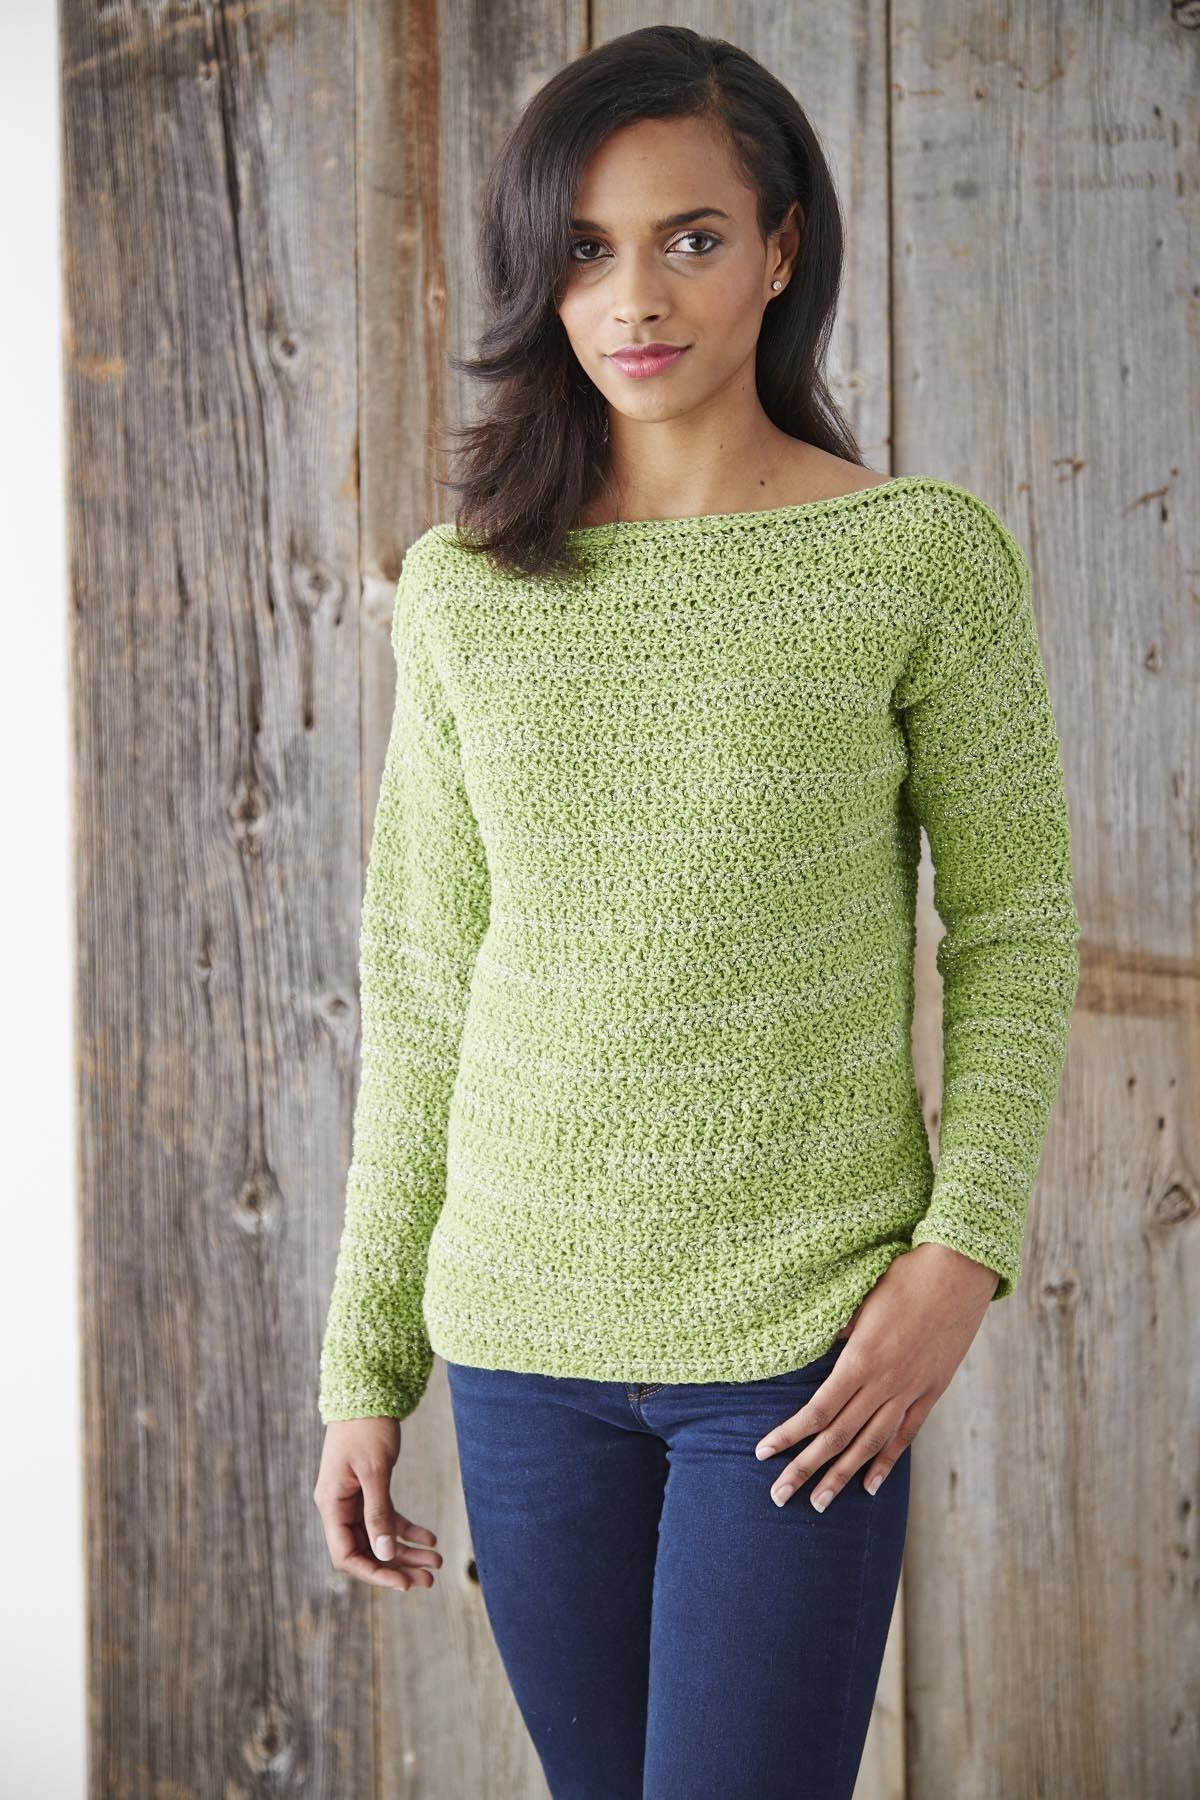 Free Crochet Sweater Patterns Boat Neck Pullover Sweater Crafts Crochet Knitting Both Paid